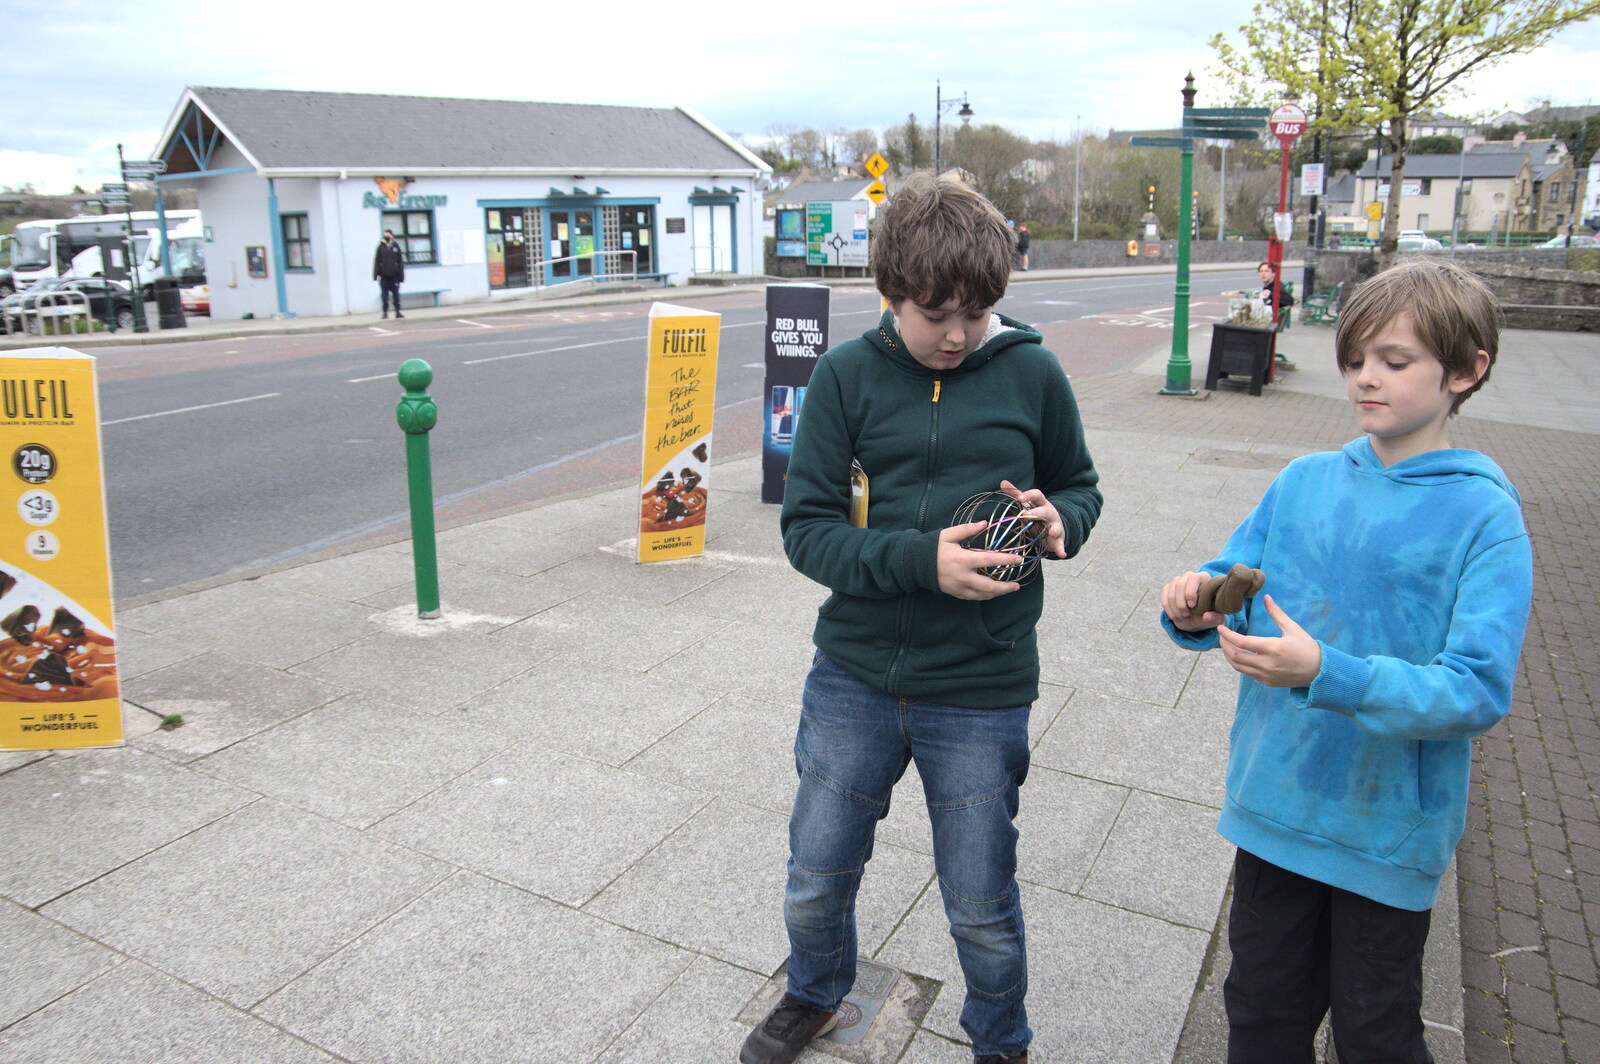 Fred and Harry play with their new things from Manorhamilton and Bundoran, Leitrim and Donegal, Ireland - 16th April 2022